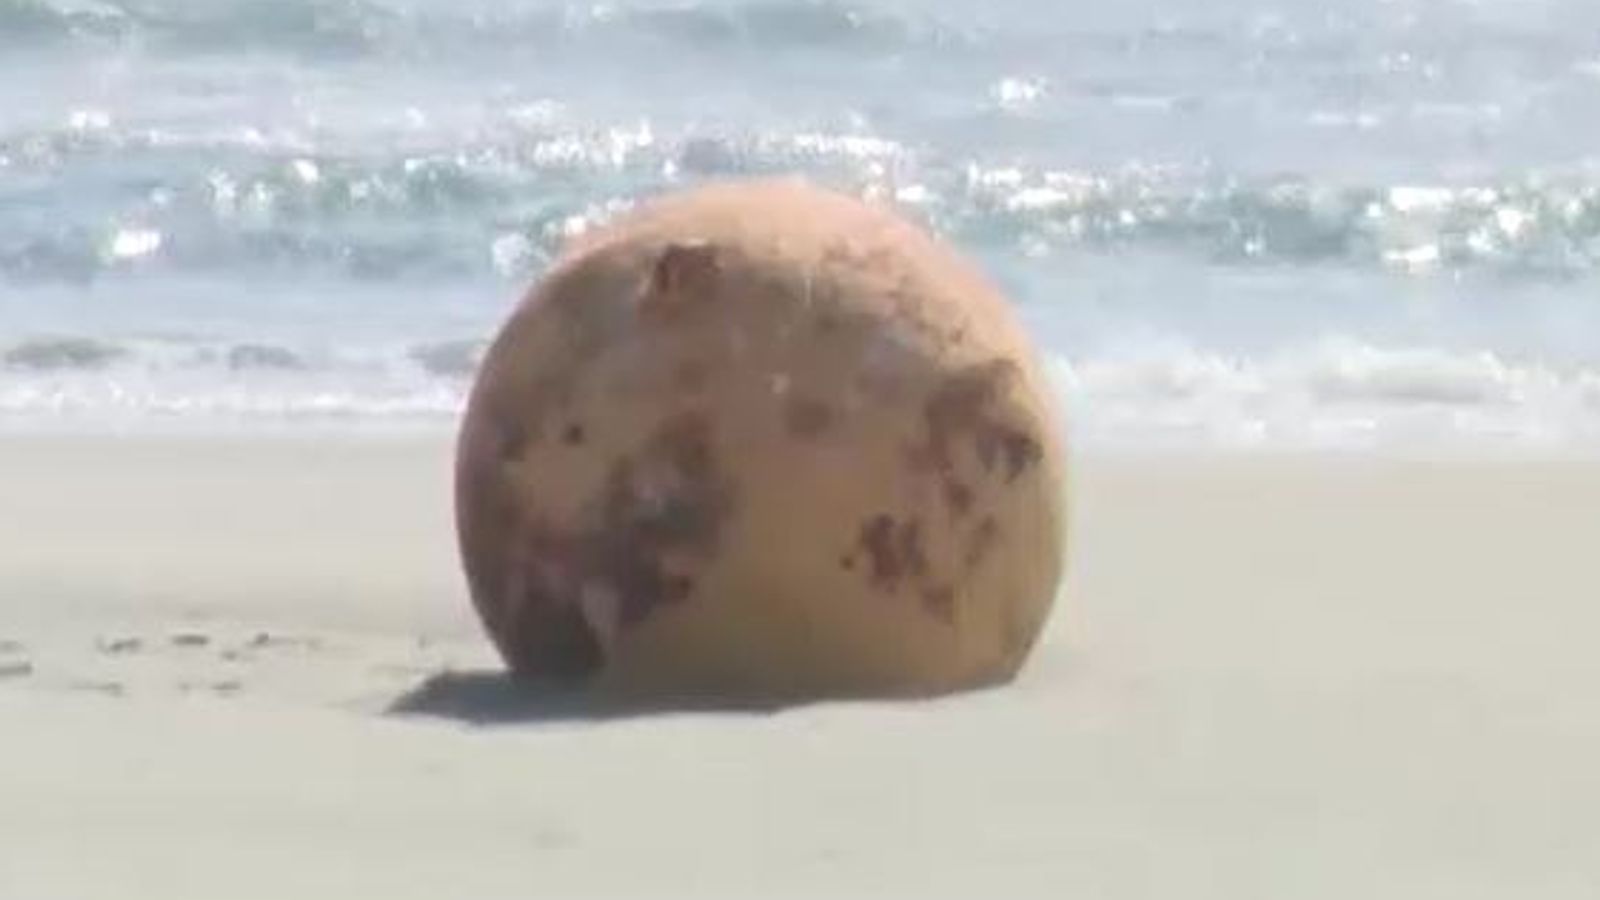 Mysterious metal ball washes up on beach in Japan Fl